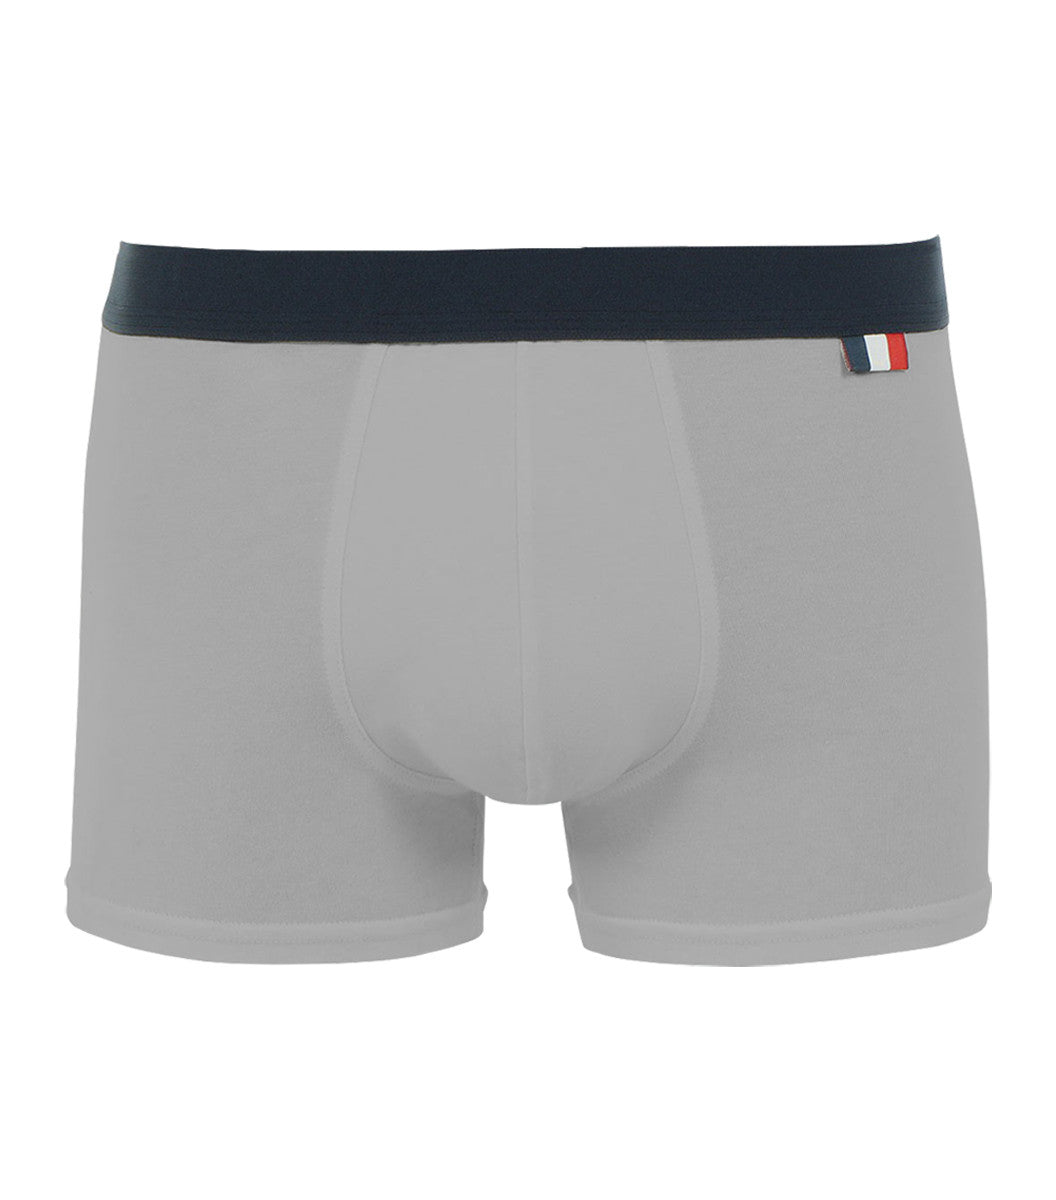 Boxer Homme x2 - Pack Duo